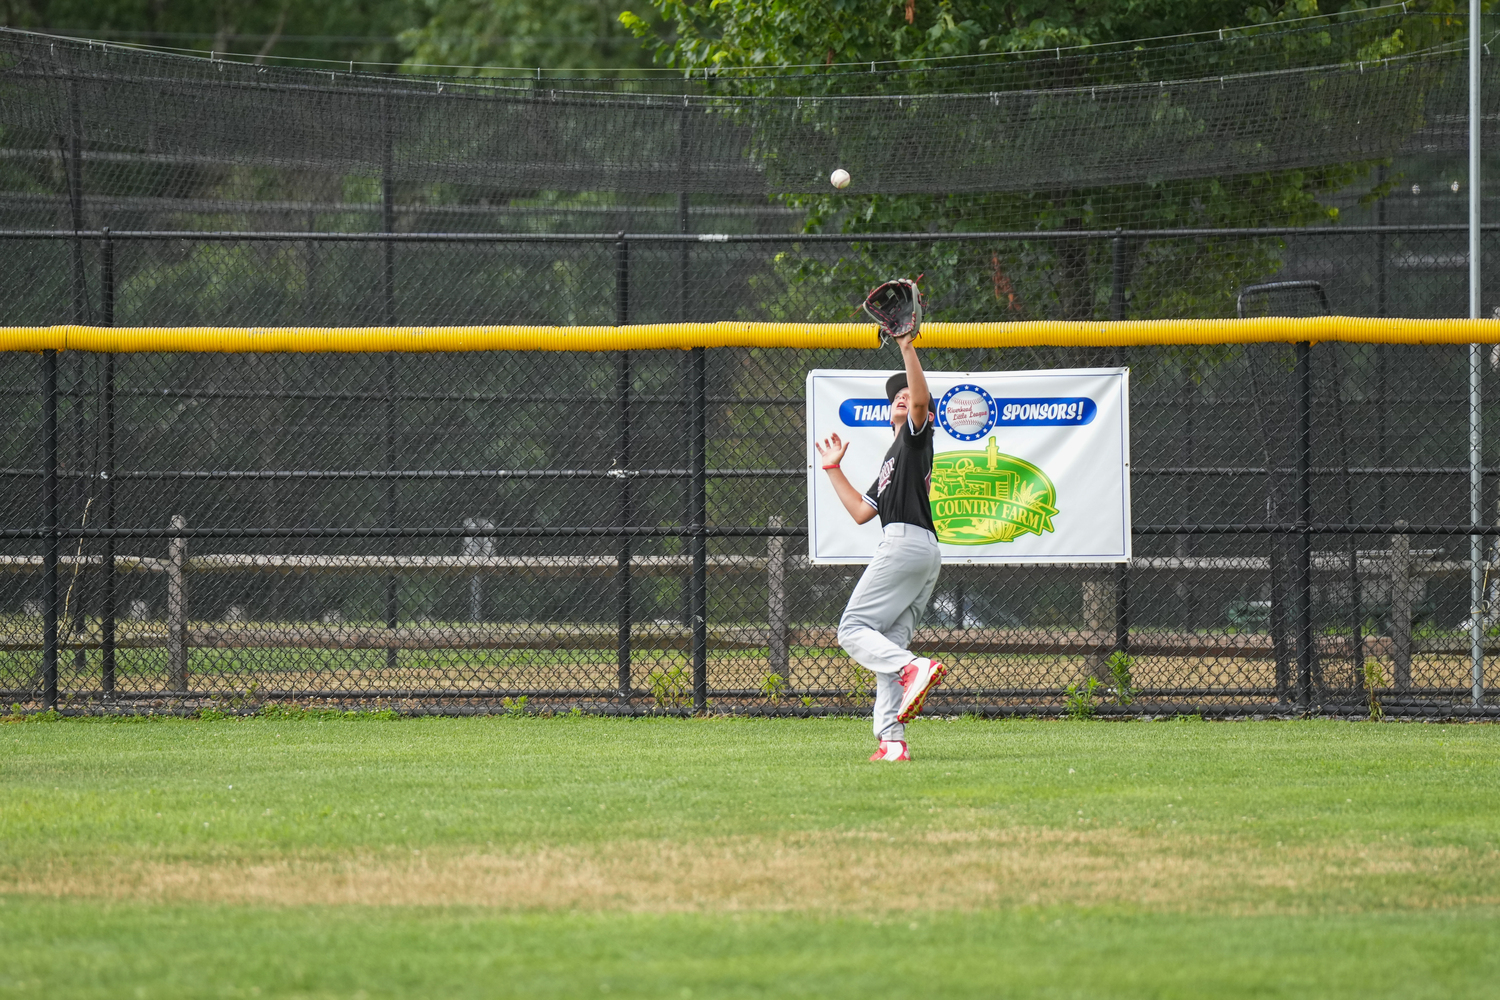 Rohan Keogh's catch in right field on a hard hit line drive kept the game scoreless for Riverhead early on. RON ESPOSITO